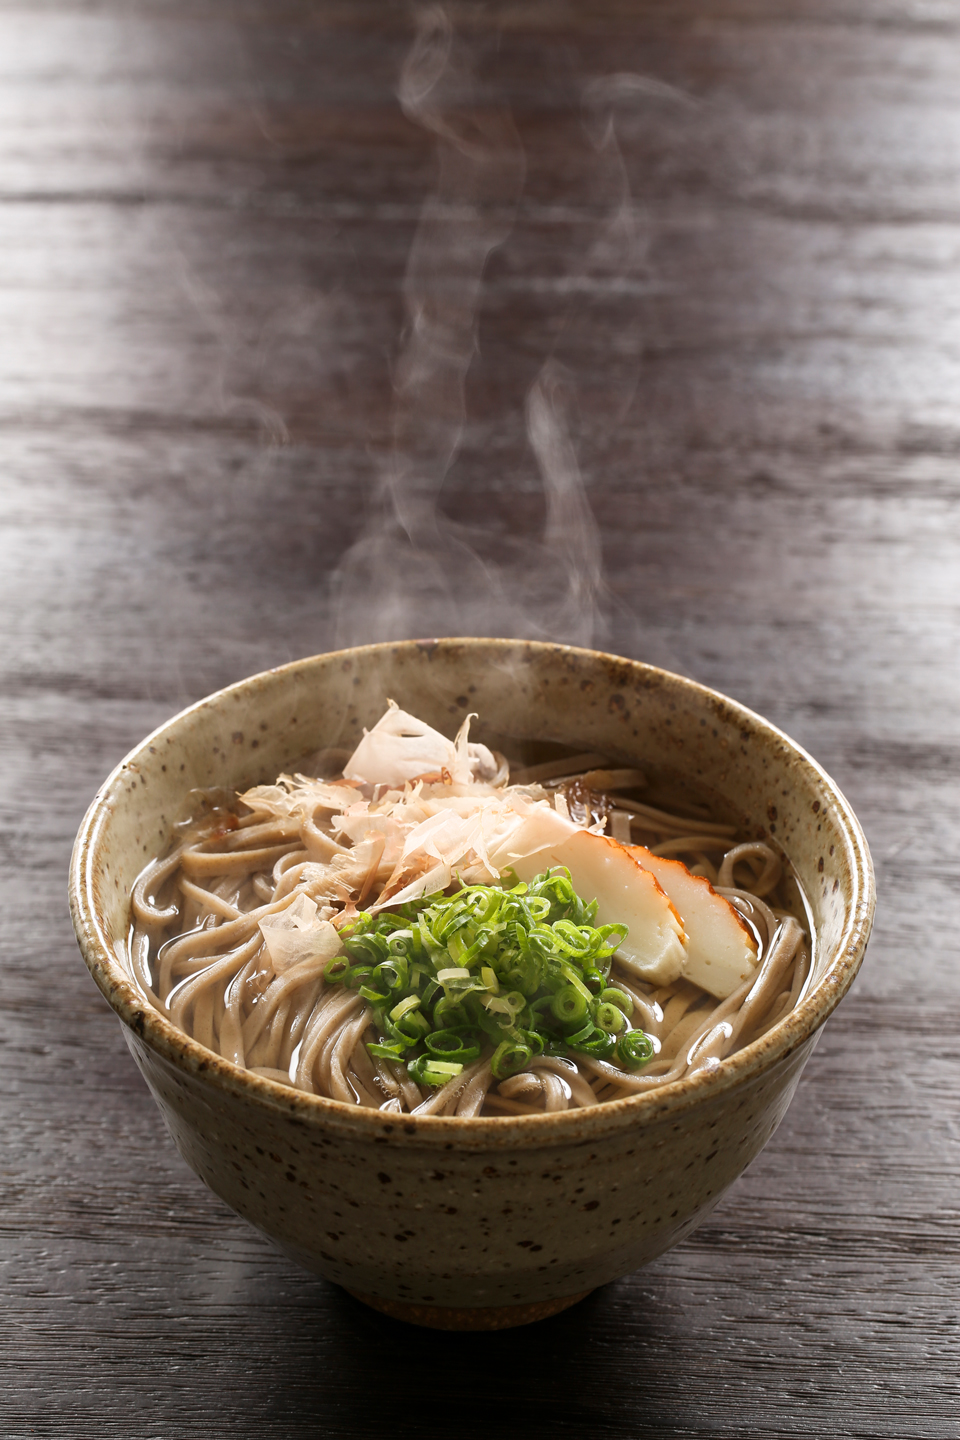 In Japan, it's customary to eat Toshikoshi Soba on New Year's Eve. The length of the noodle signifies a long life. And as the noodles cut easily, they represent letting go of hardships from the passing year.